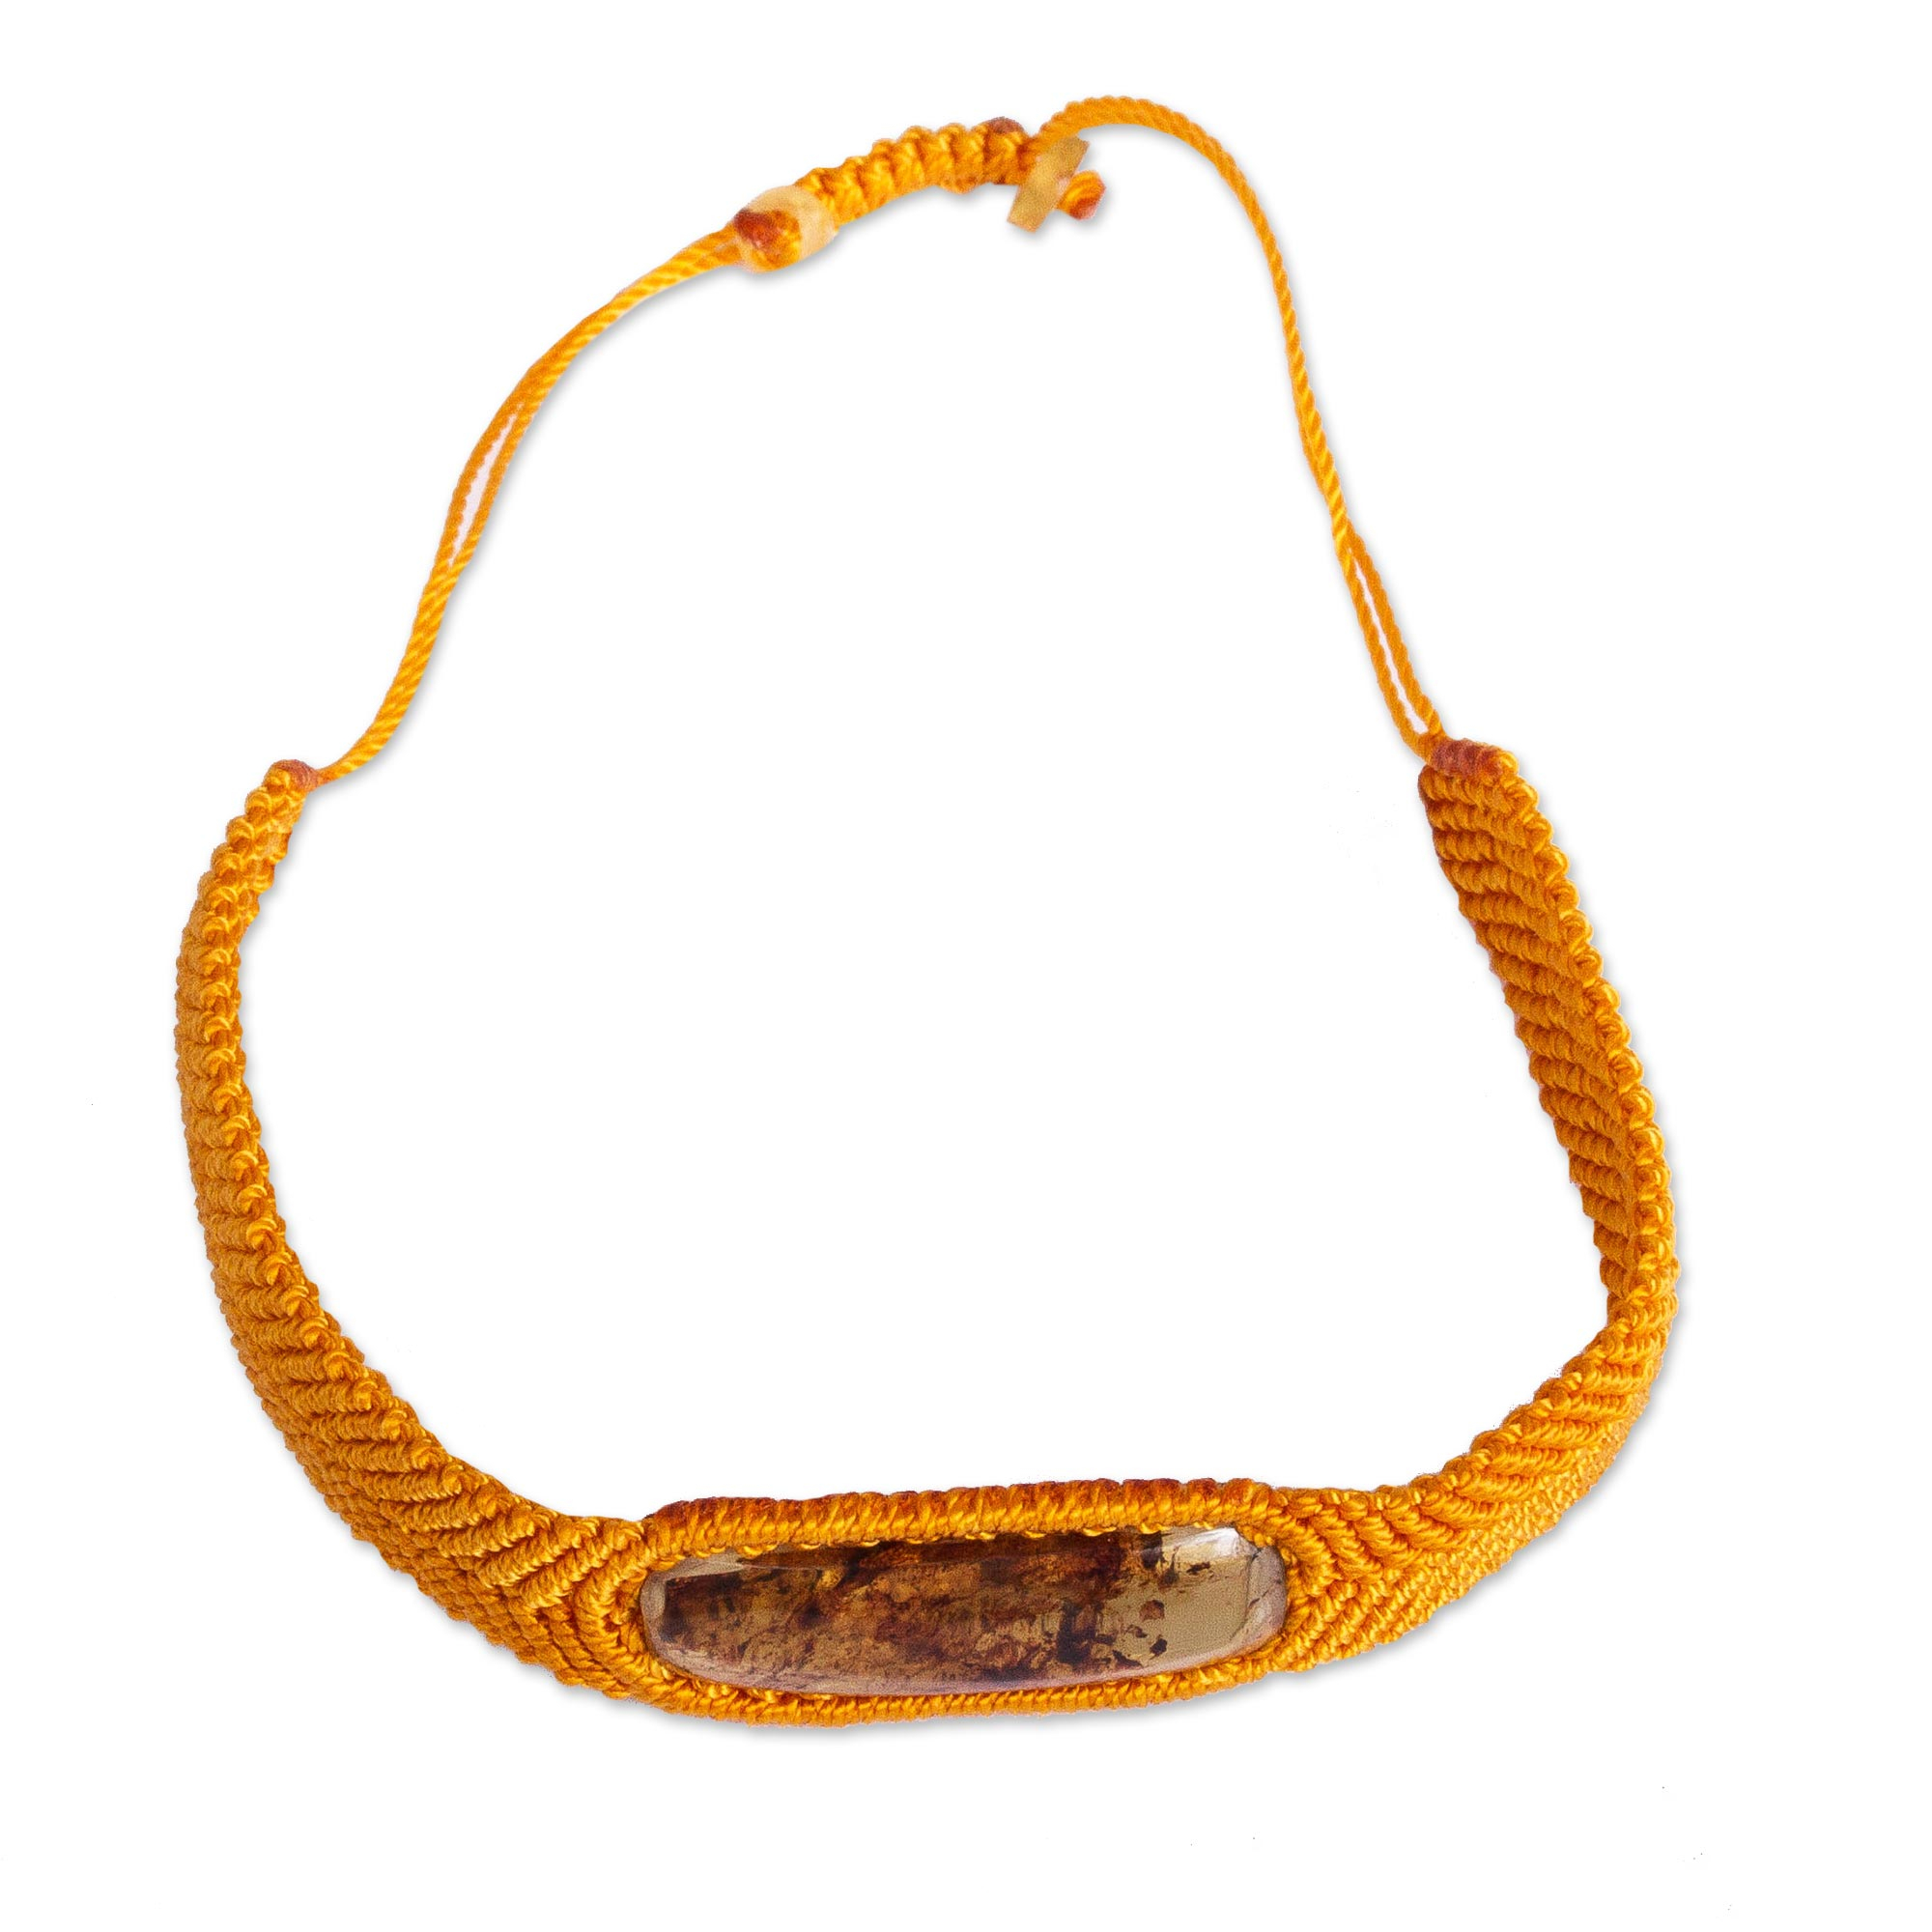 Braided Leather Cord Necklace - Stone Treasures by the Lake